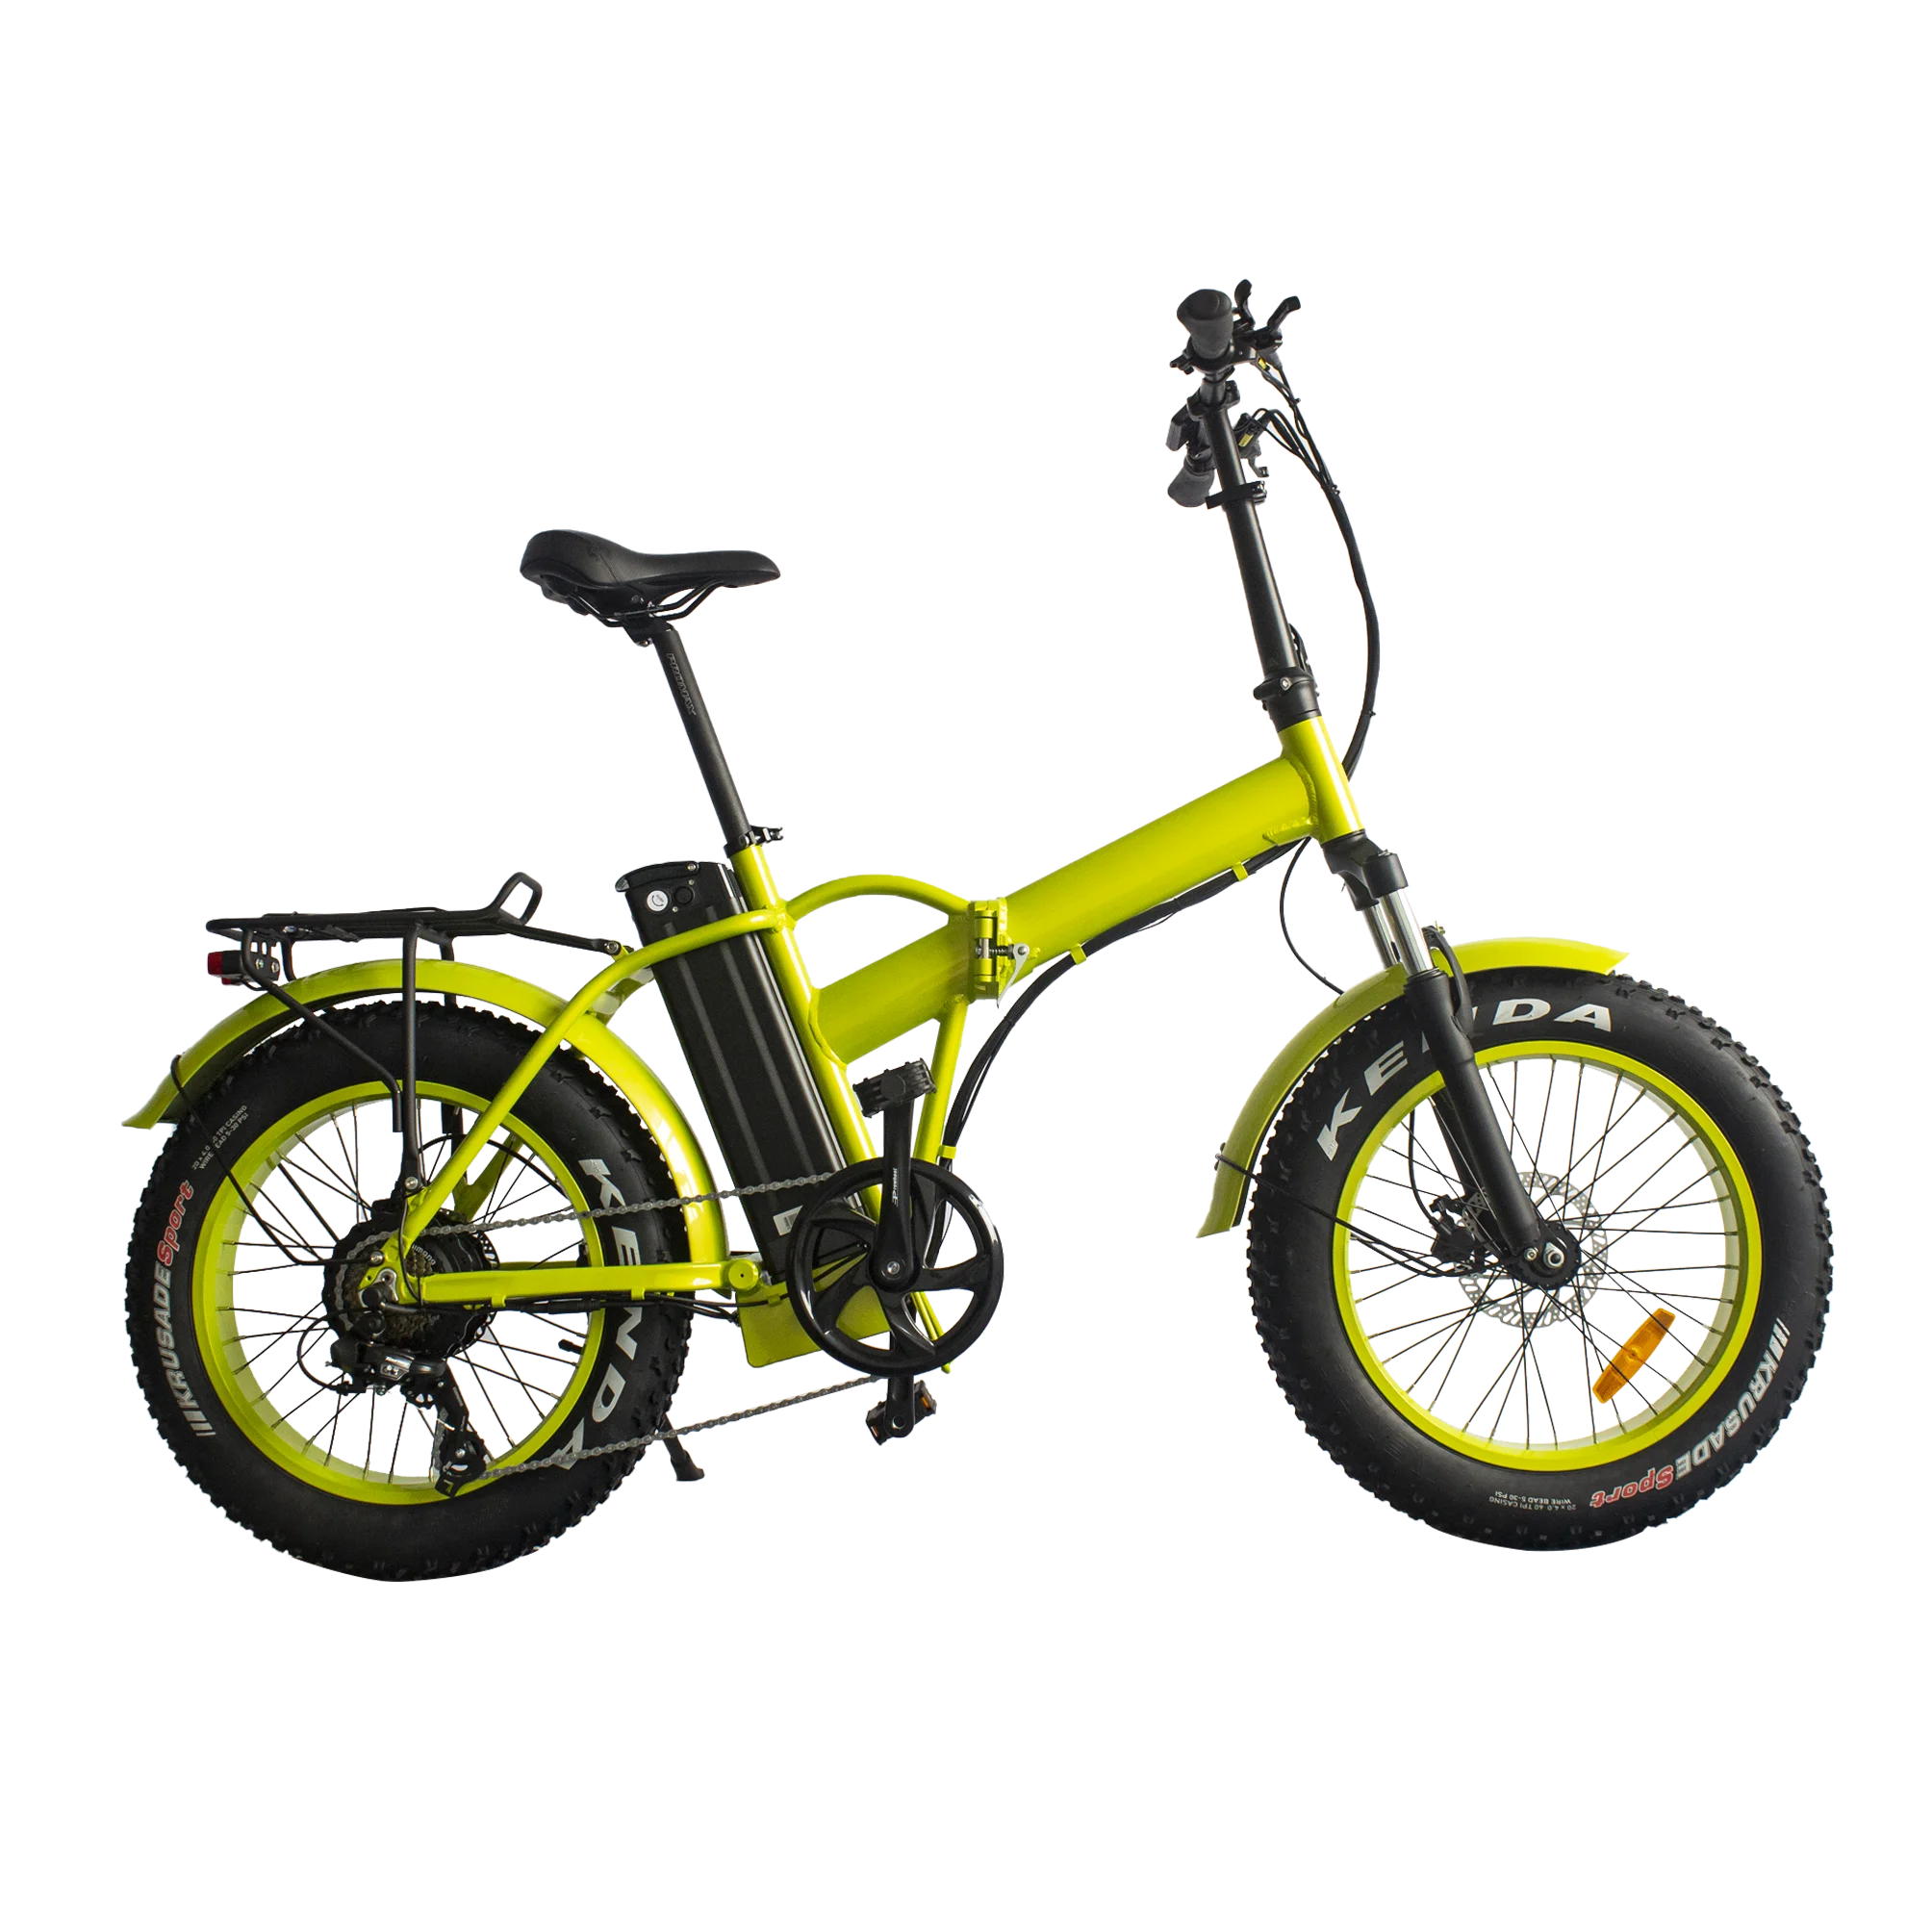 Made In China Low Price Sports Bike Electric Bicycle Adult Two Wheel Electric Bici Cruiser electric motor motorcycle dirt bike for adult made in china india scooter cheap electric motorcycle